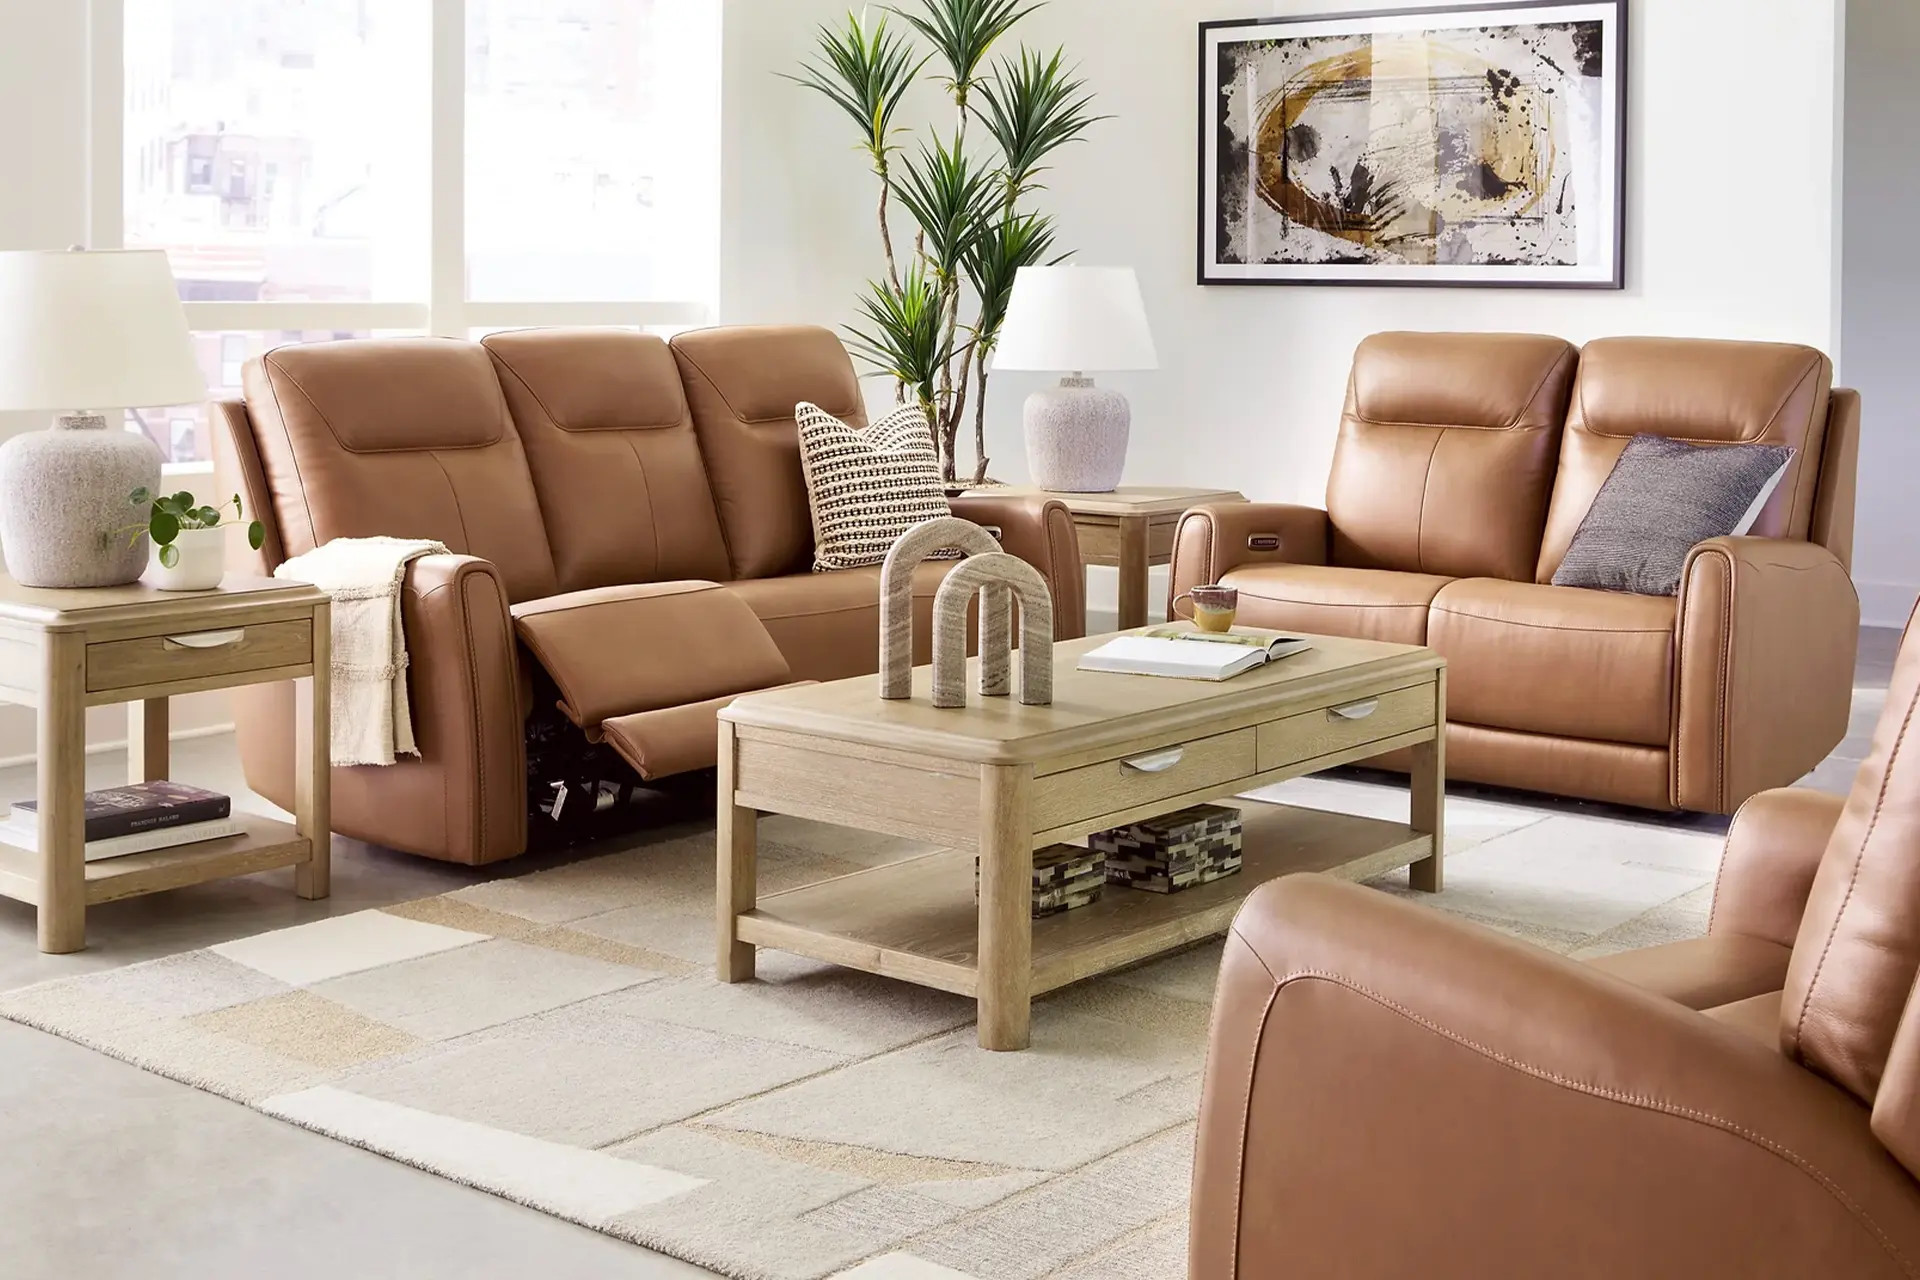 Tryanny Butterscotch Power Reclining Sofa, Love, and Recliner.